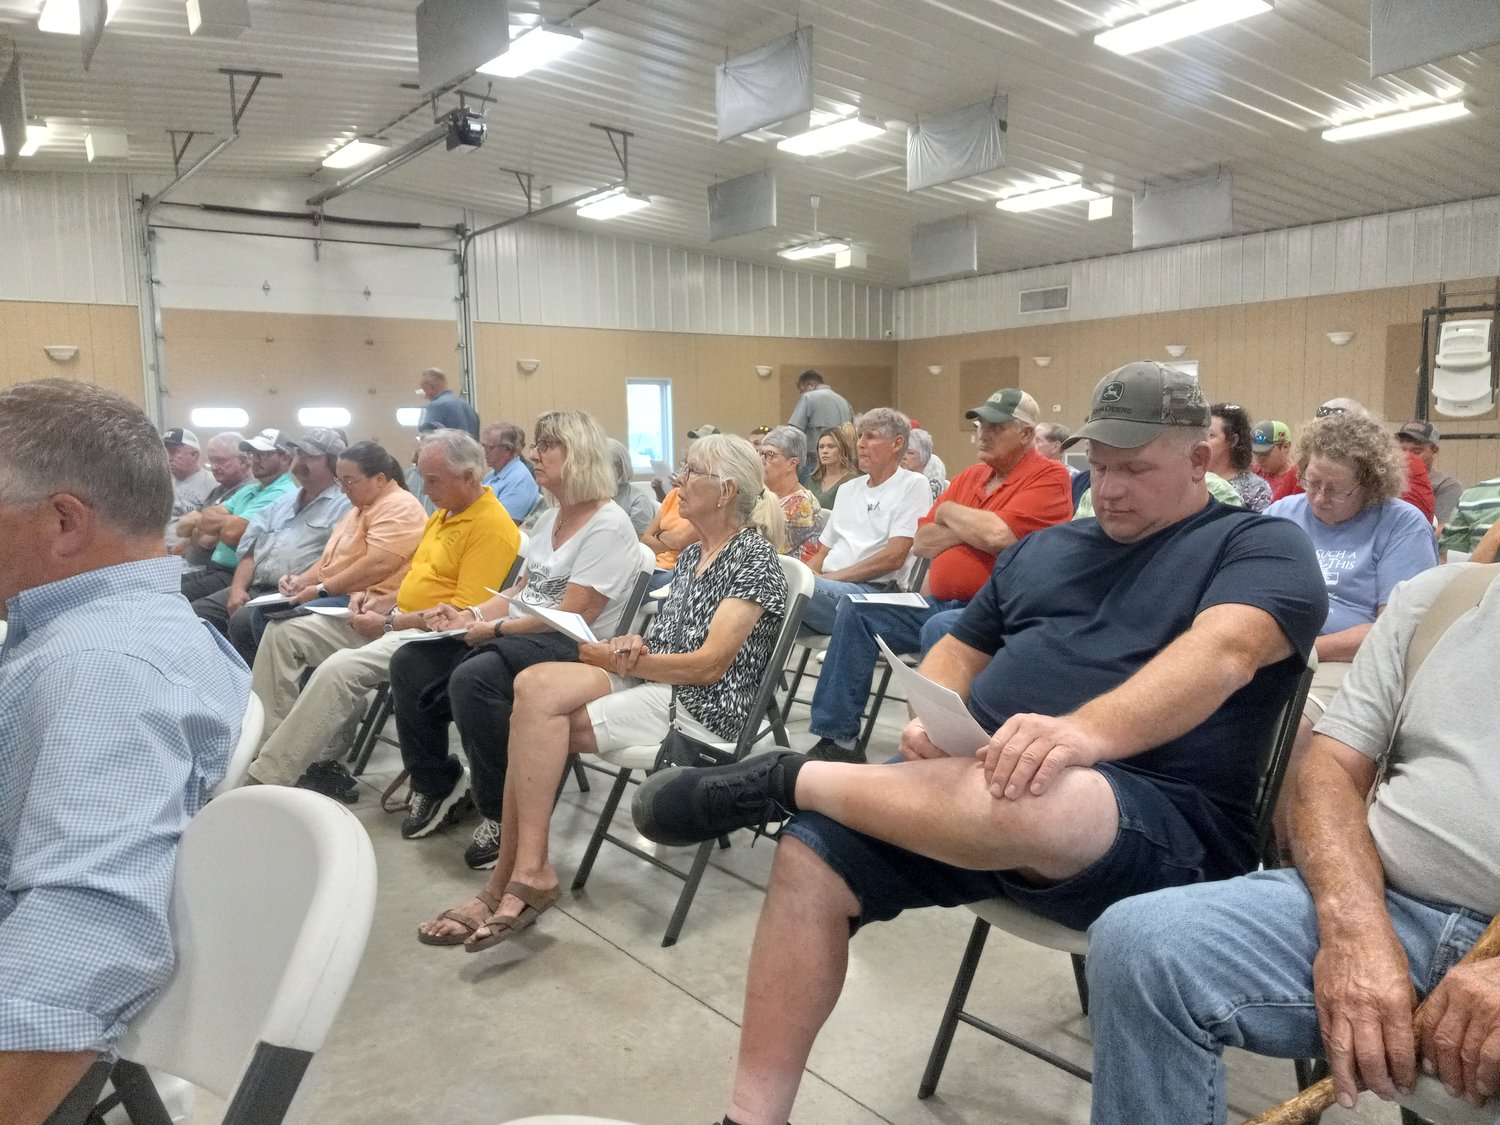 About 75 people met at the Audrain County 4-H building on Wednesday to discuss their feelings about the Tiger Connector and the Grain Belt Express as more questions have gone unanswered according to attendees.                   [Alan Dale]